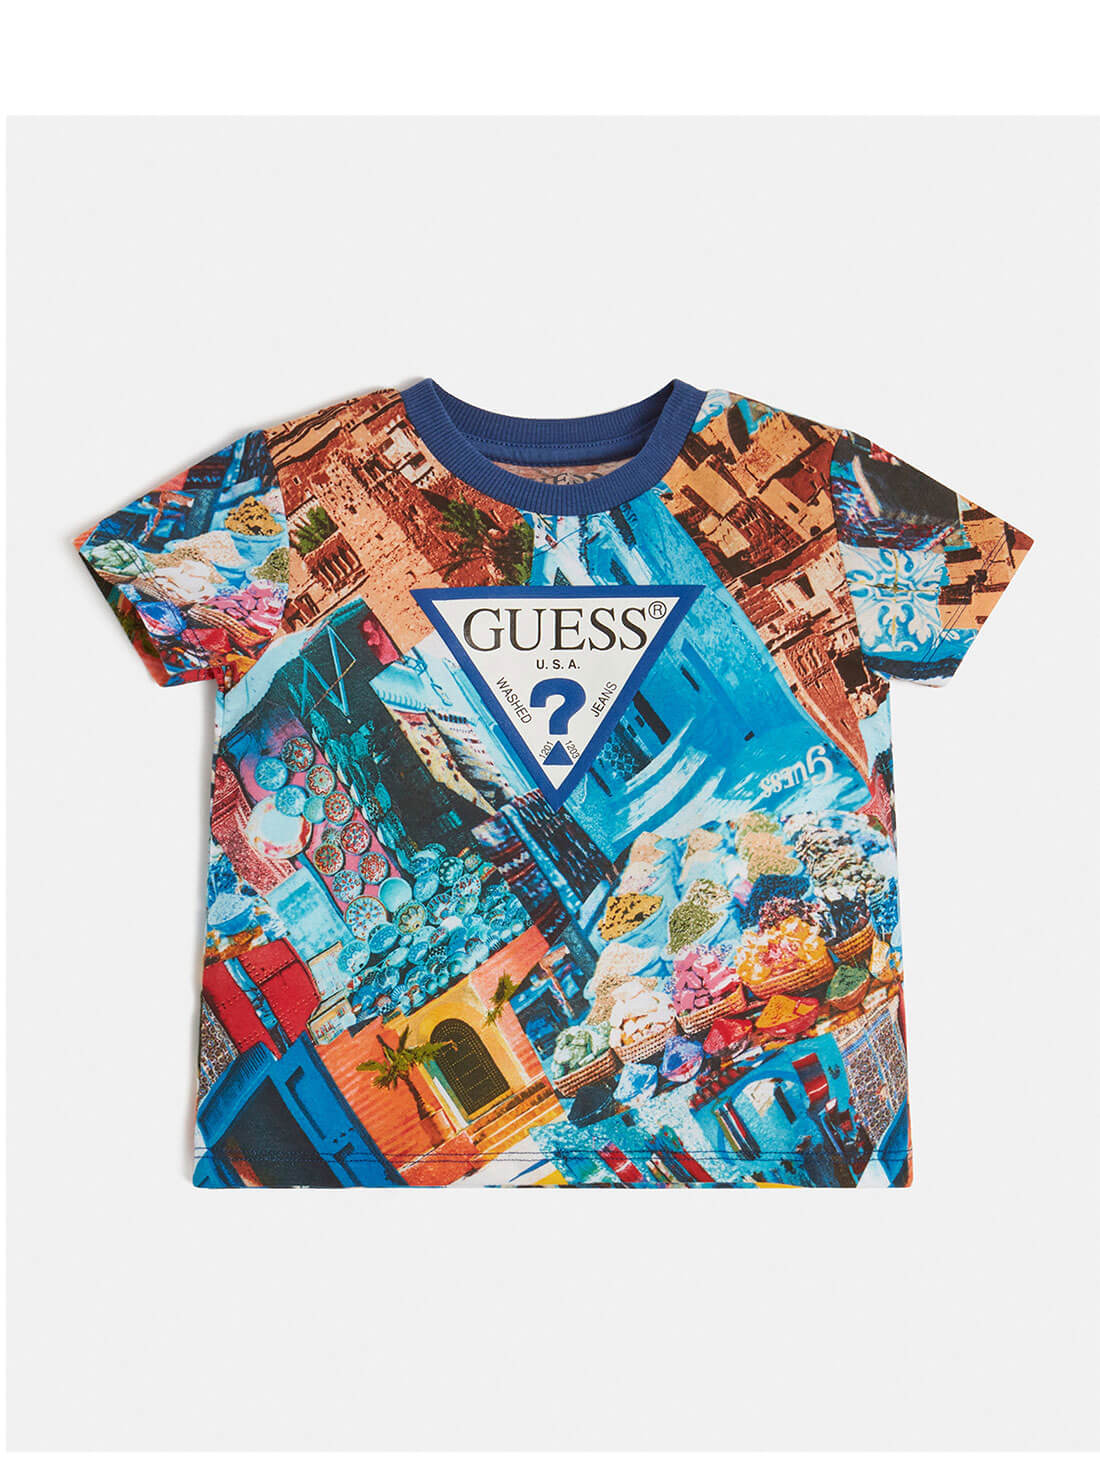 Boy's Graphic Patchwork T-Shirt (2-7) front view